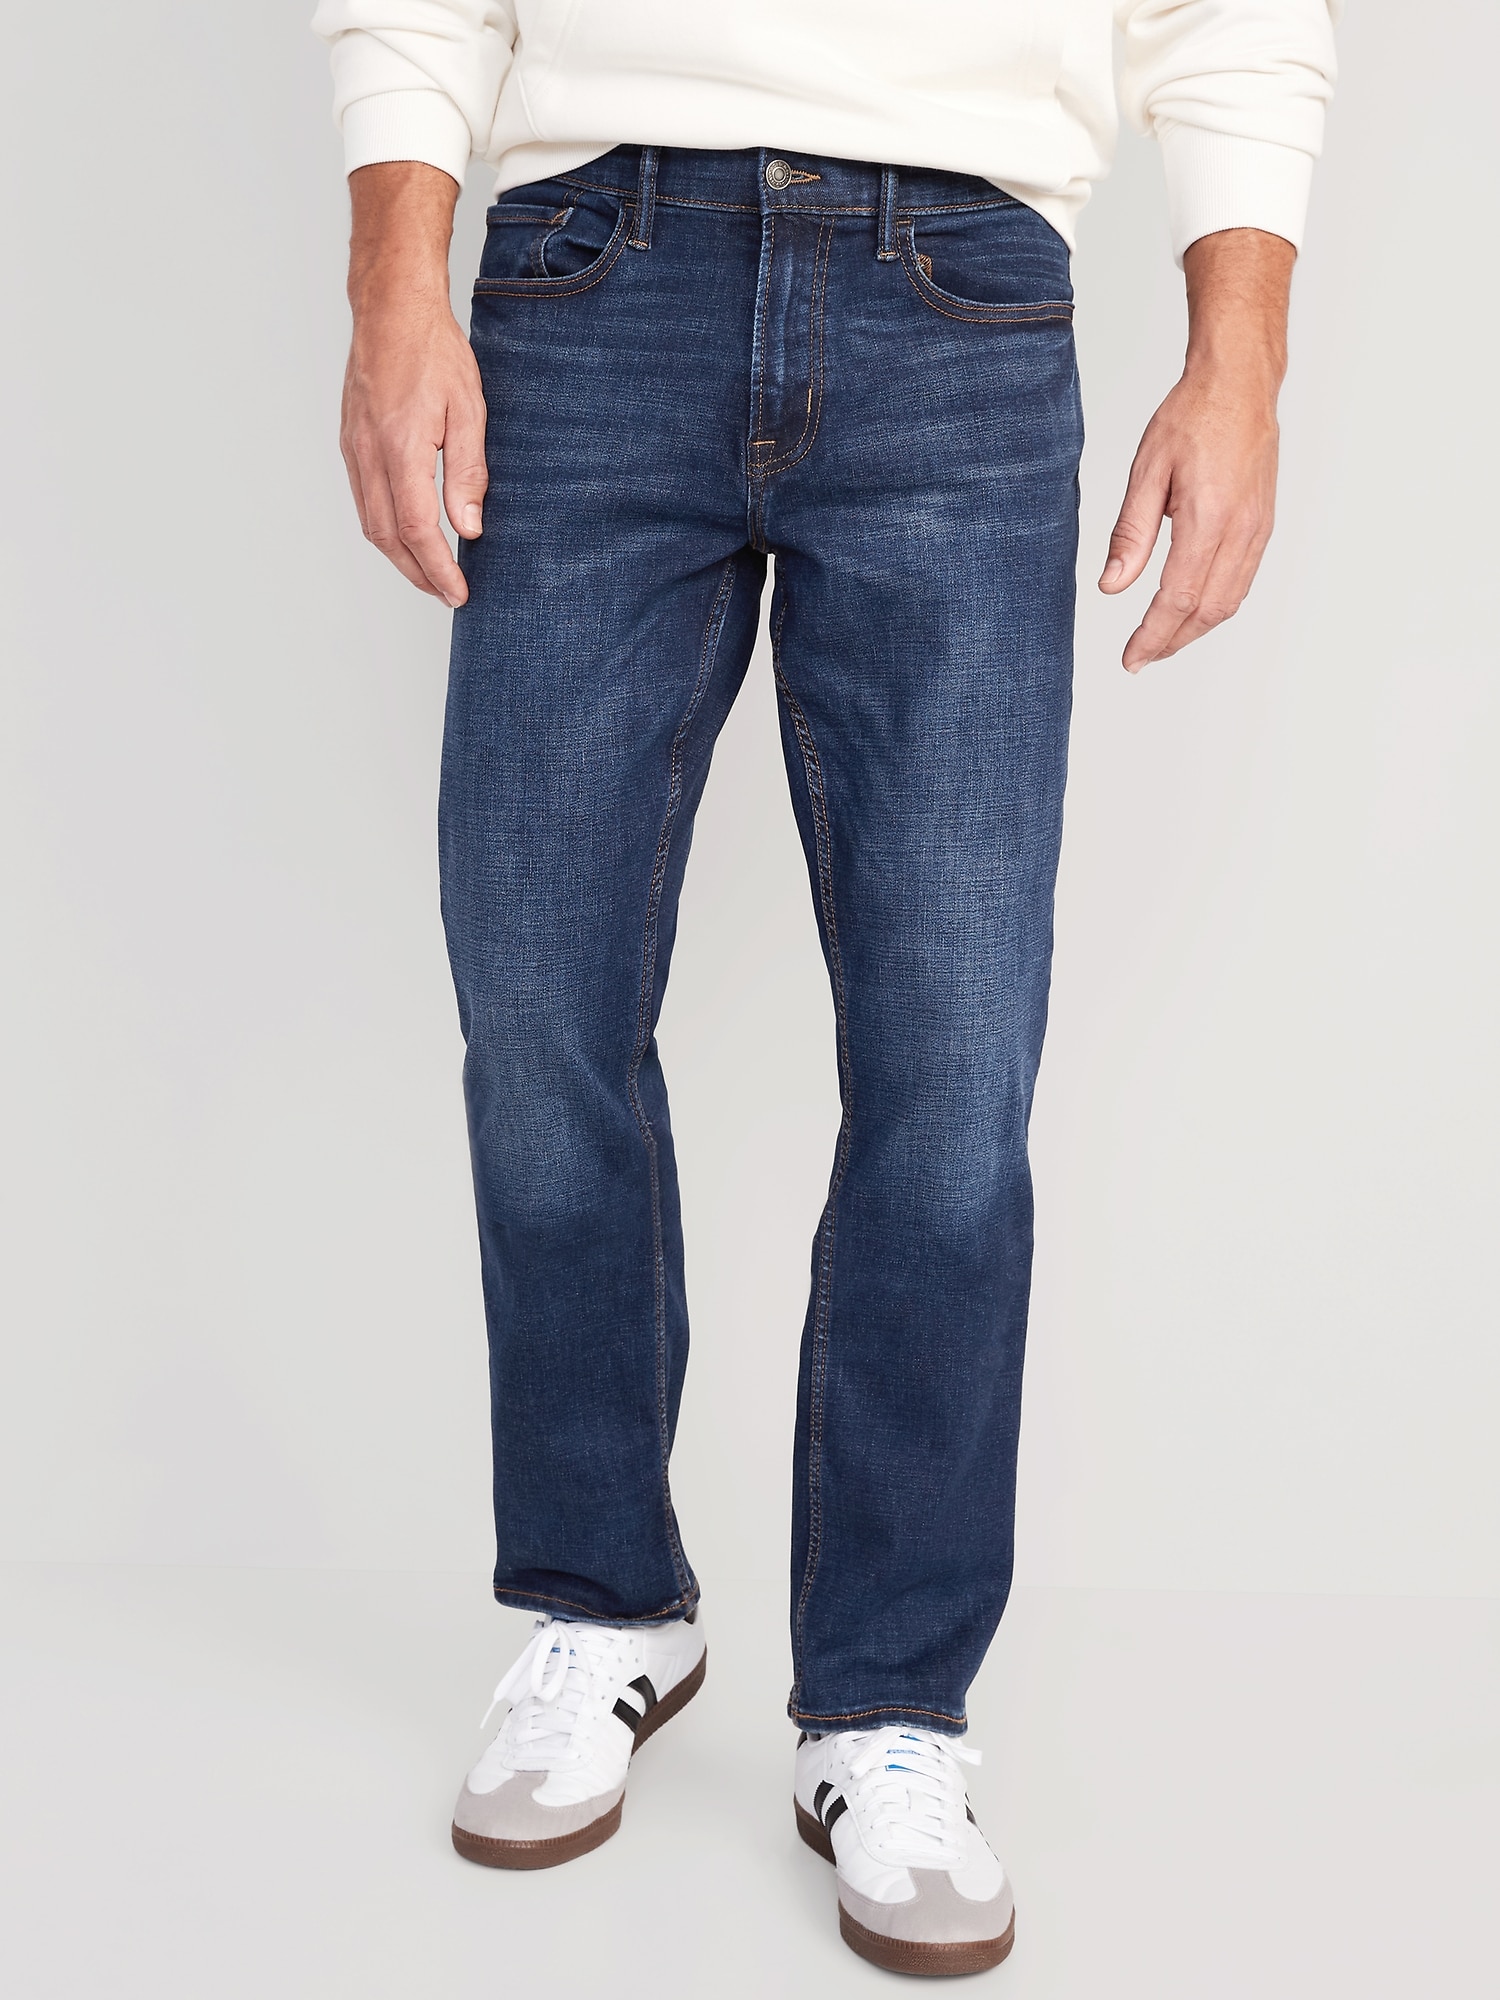 360° Tech Stretch Performance Jeans for | Old Navy